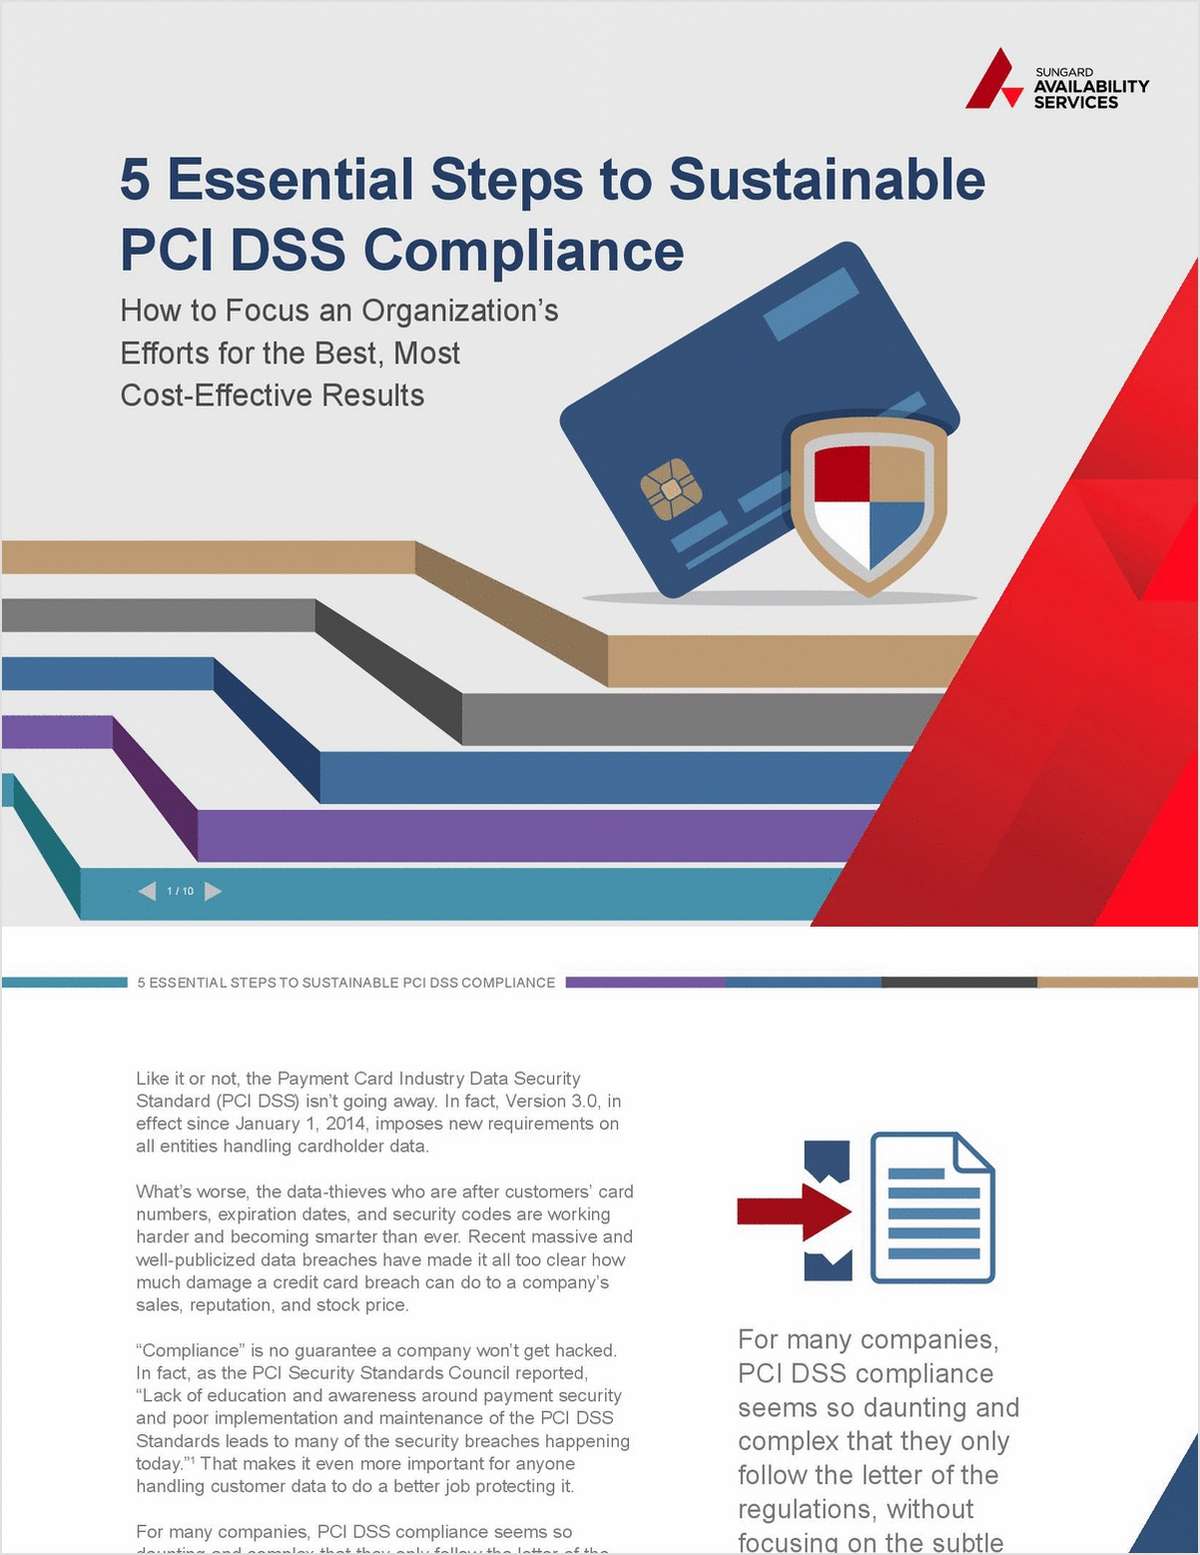 5 Essential Steps to Sustainable PCI DSS Compliance